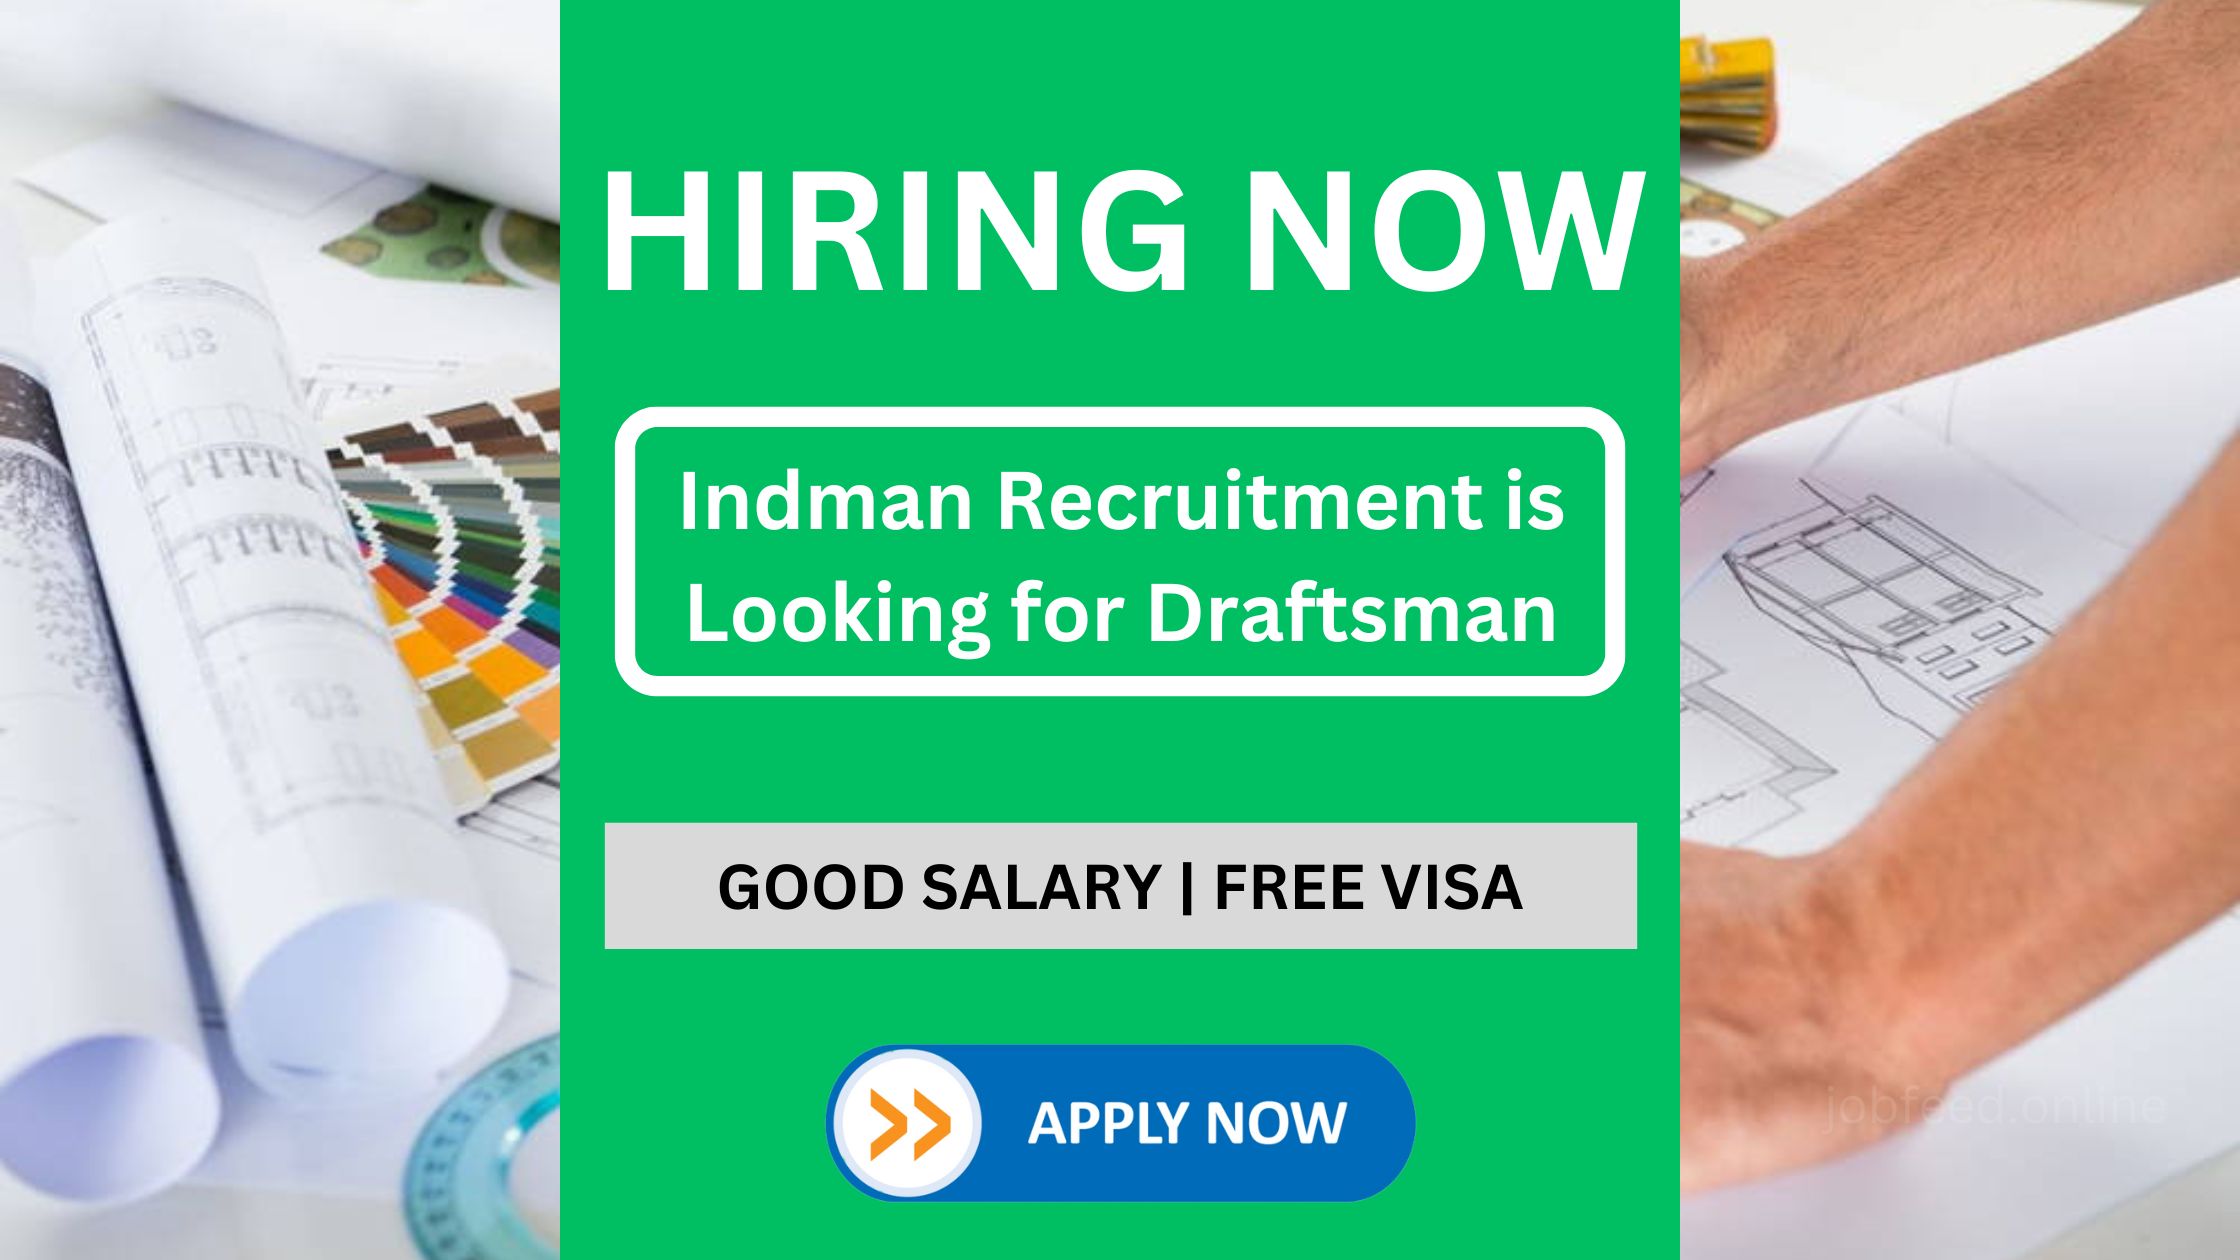 Indman Recruitment is Looking for Draftsman